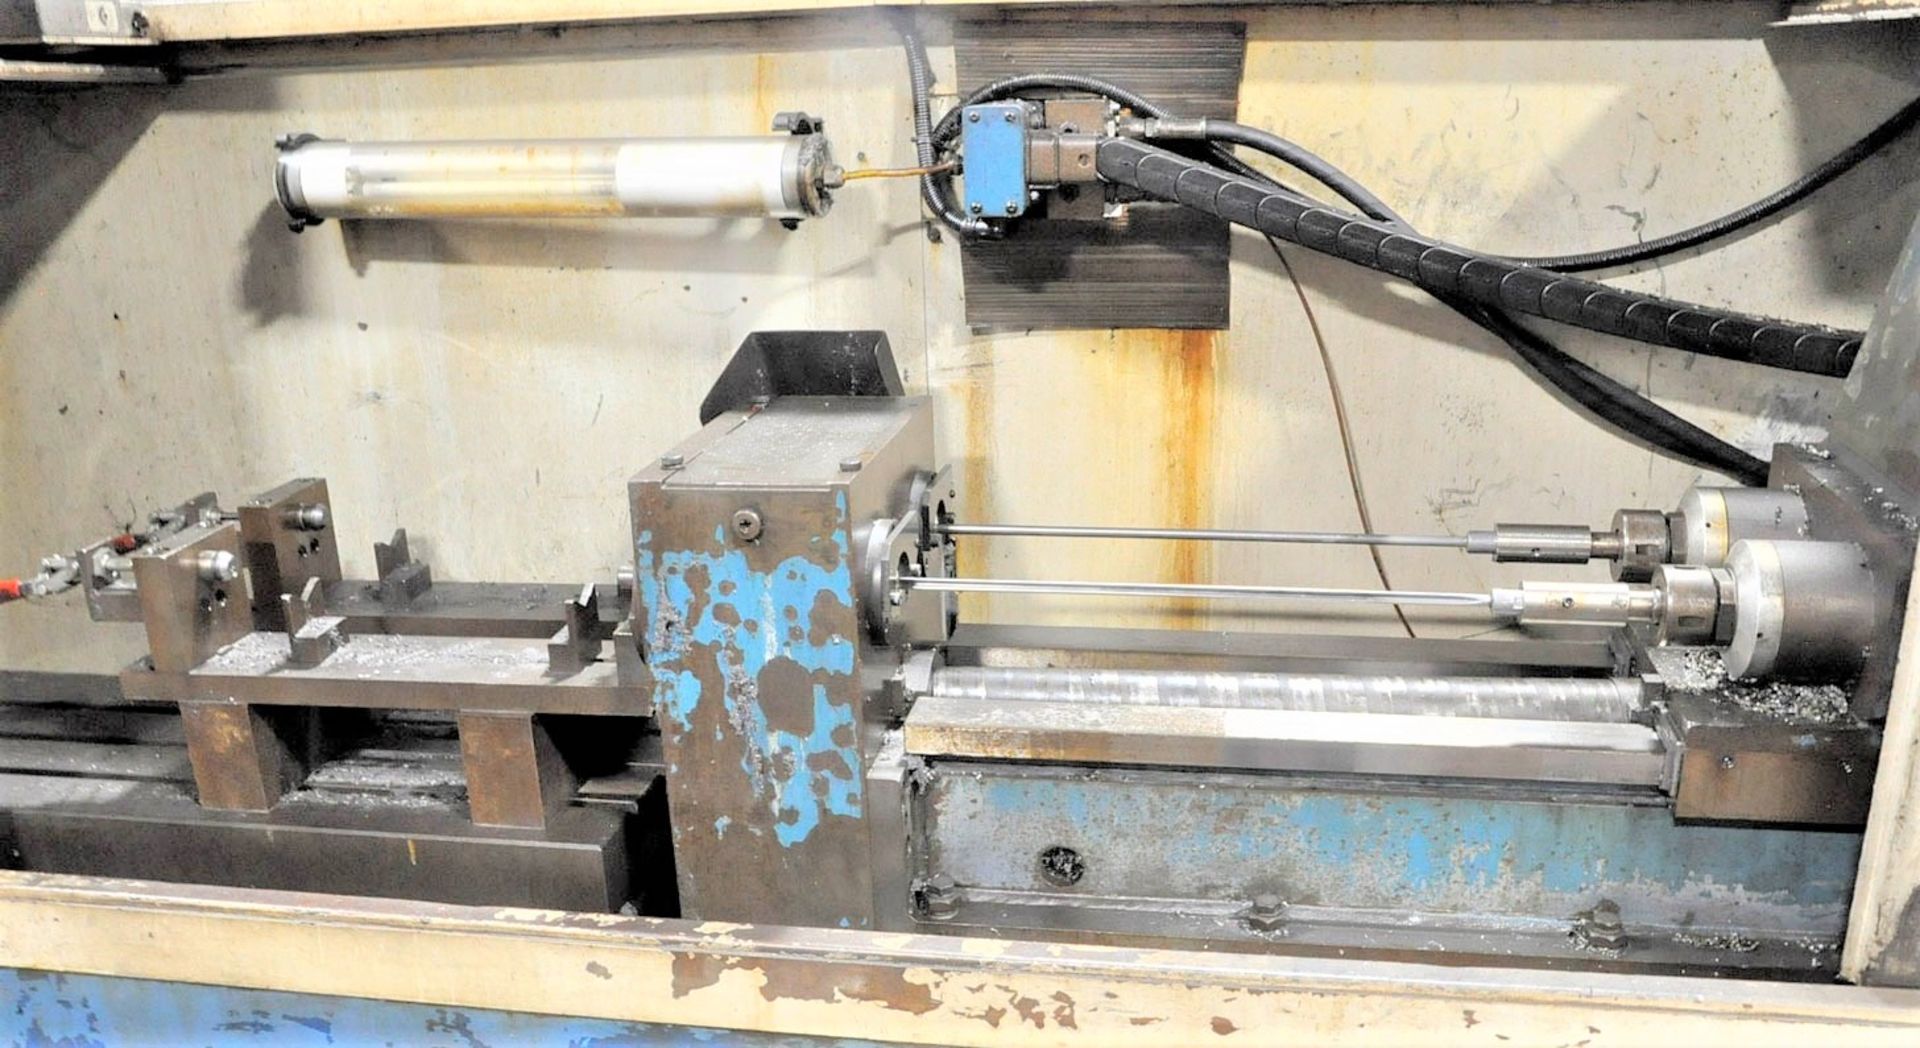 1/2" x 20" Mollart Twin Spindle CNC Gun Drill, S/N A444-0700, New 2000 - Image 2 of 5